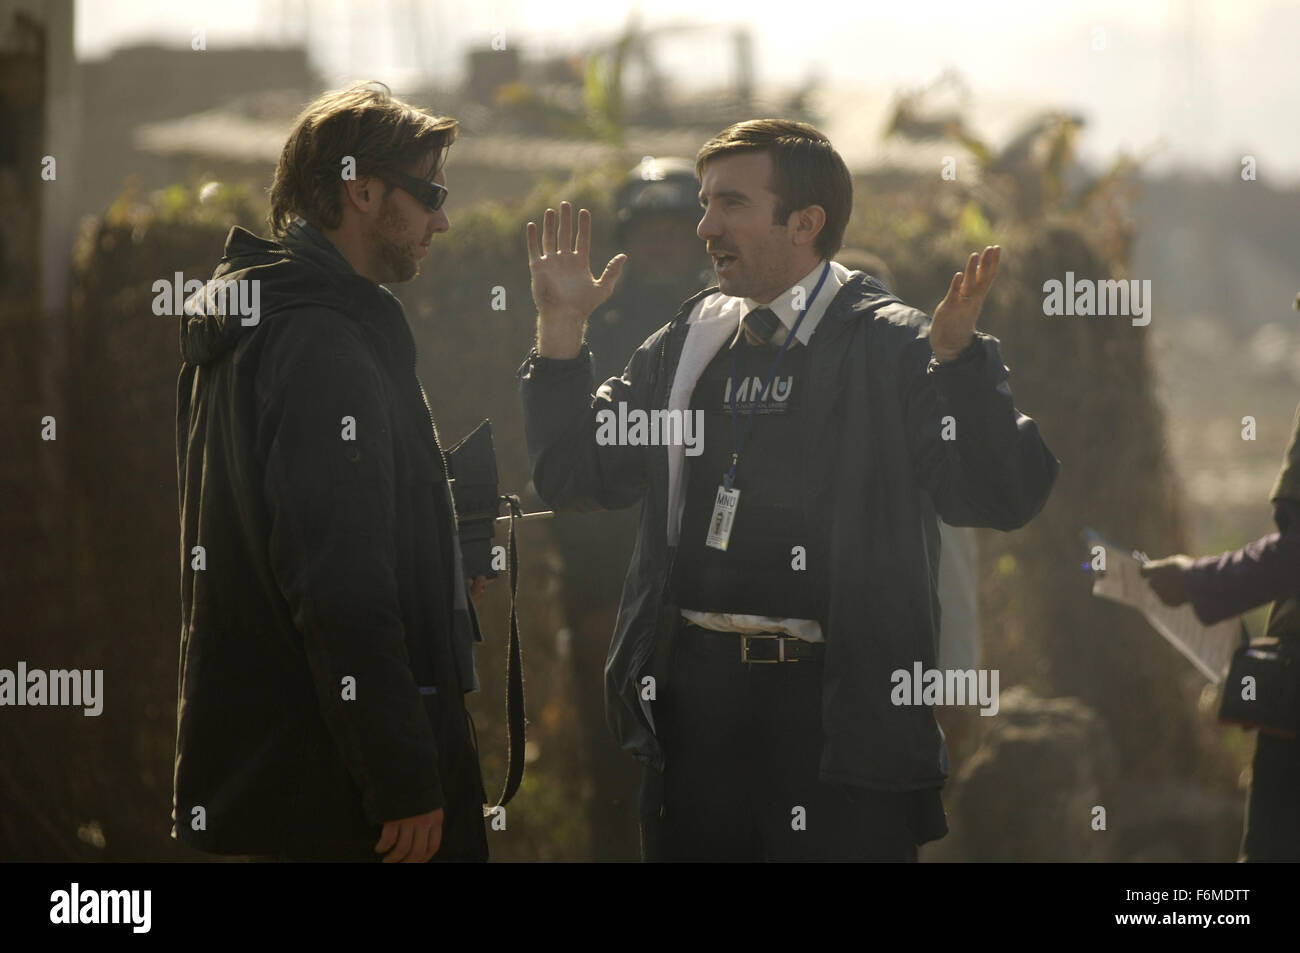 RELEASE DATE: August 14, 2009. MOVIE TITLE: District 9. STUDIO: Sony Pictures. PLOT: An extraterrestrial race forced to live in slum-like conditions on Earth suddenly find a kindred spirit in a government agent that is exposed to their biotechnology. PICTURED: Director NEILL BLOMKAMP (left) and SHARLTO COPLEY on the set Stock Photo